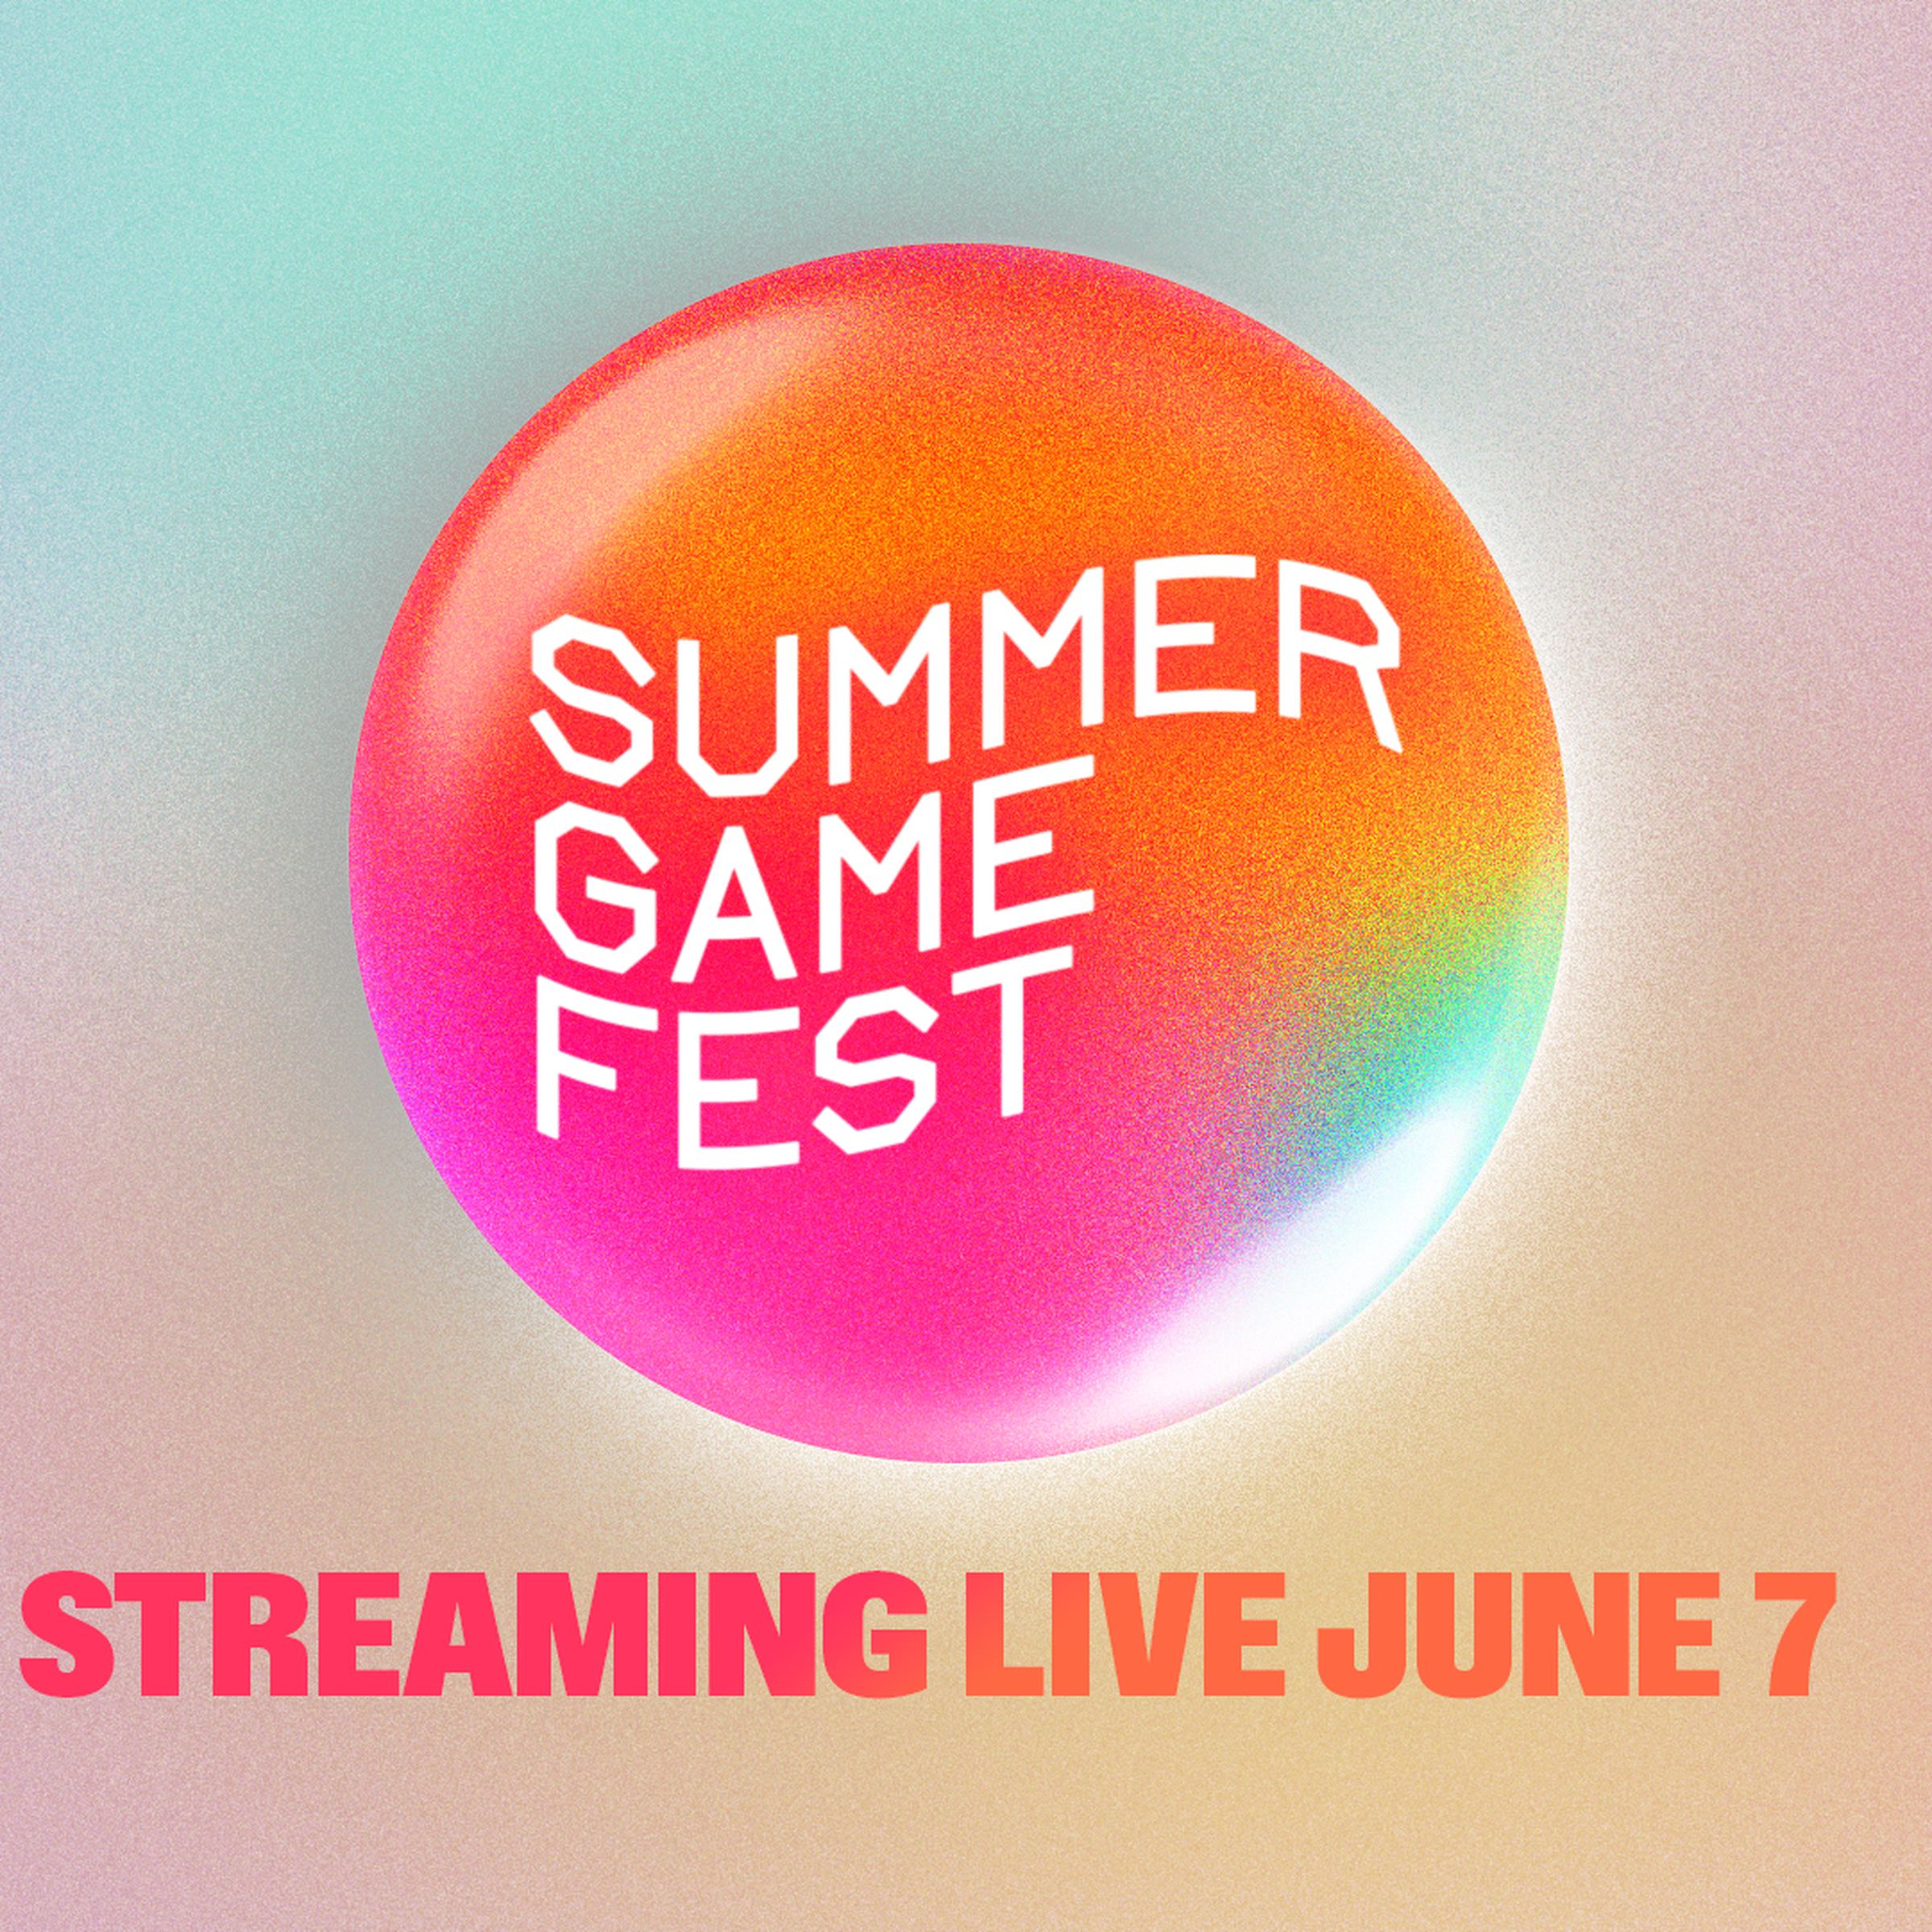 Logo for Summer Game Fest 2024 featuring a bright orange circle with the text “Summer Game Fest” inside with the text “Streaming Live June 7” below with a pastel sherbet gradient background.